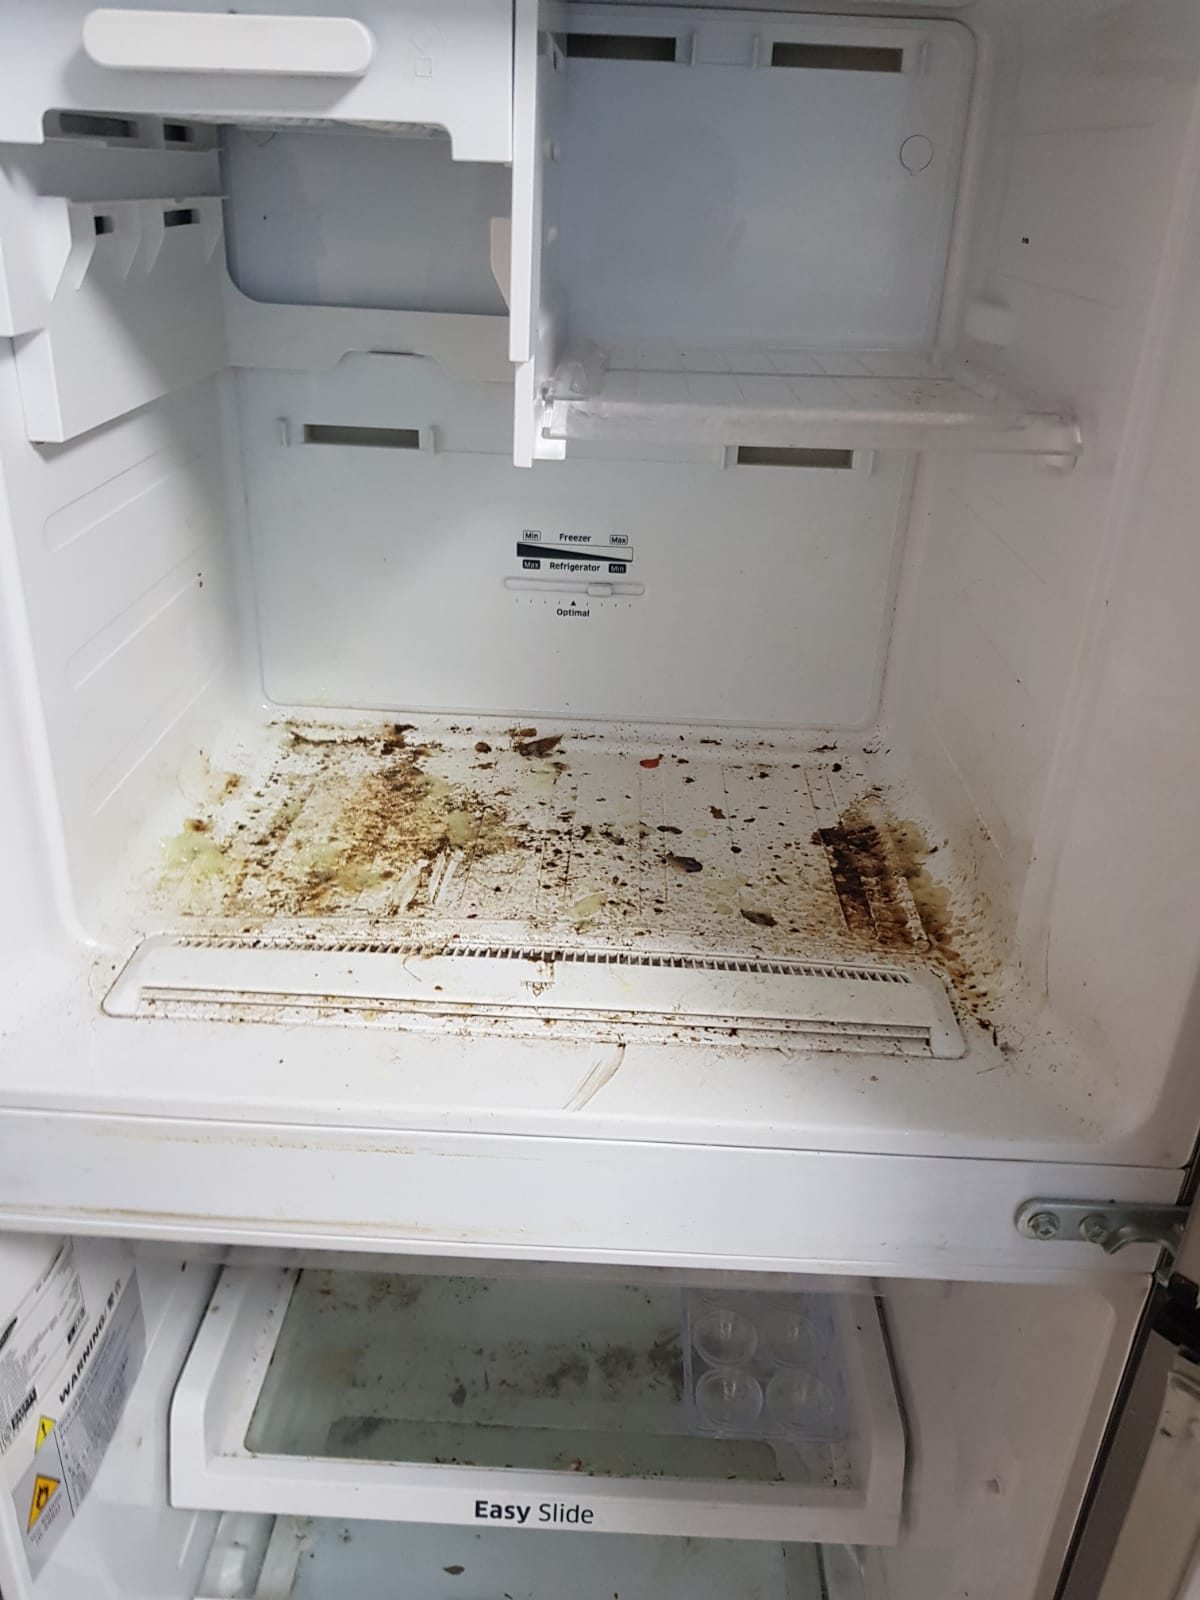 a dirty refrigerator that has not been well cleaned over time, molds and bacteria growing on surface